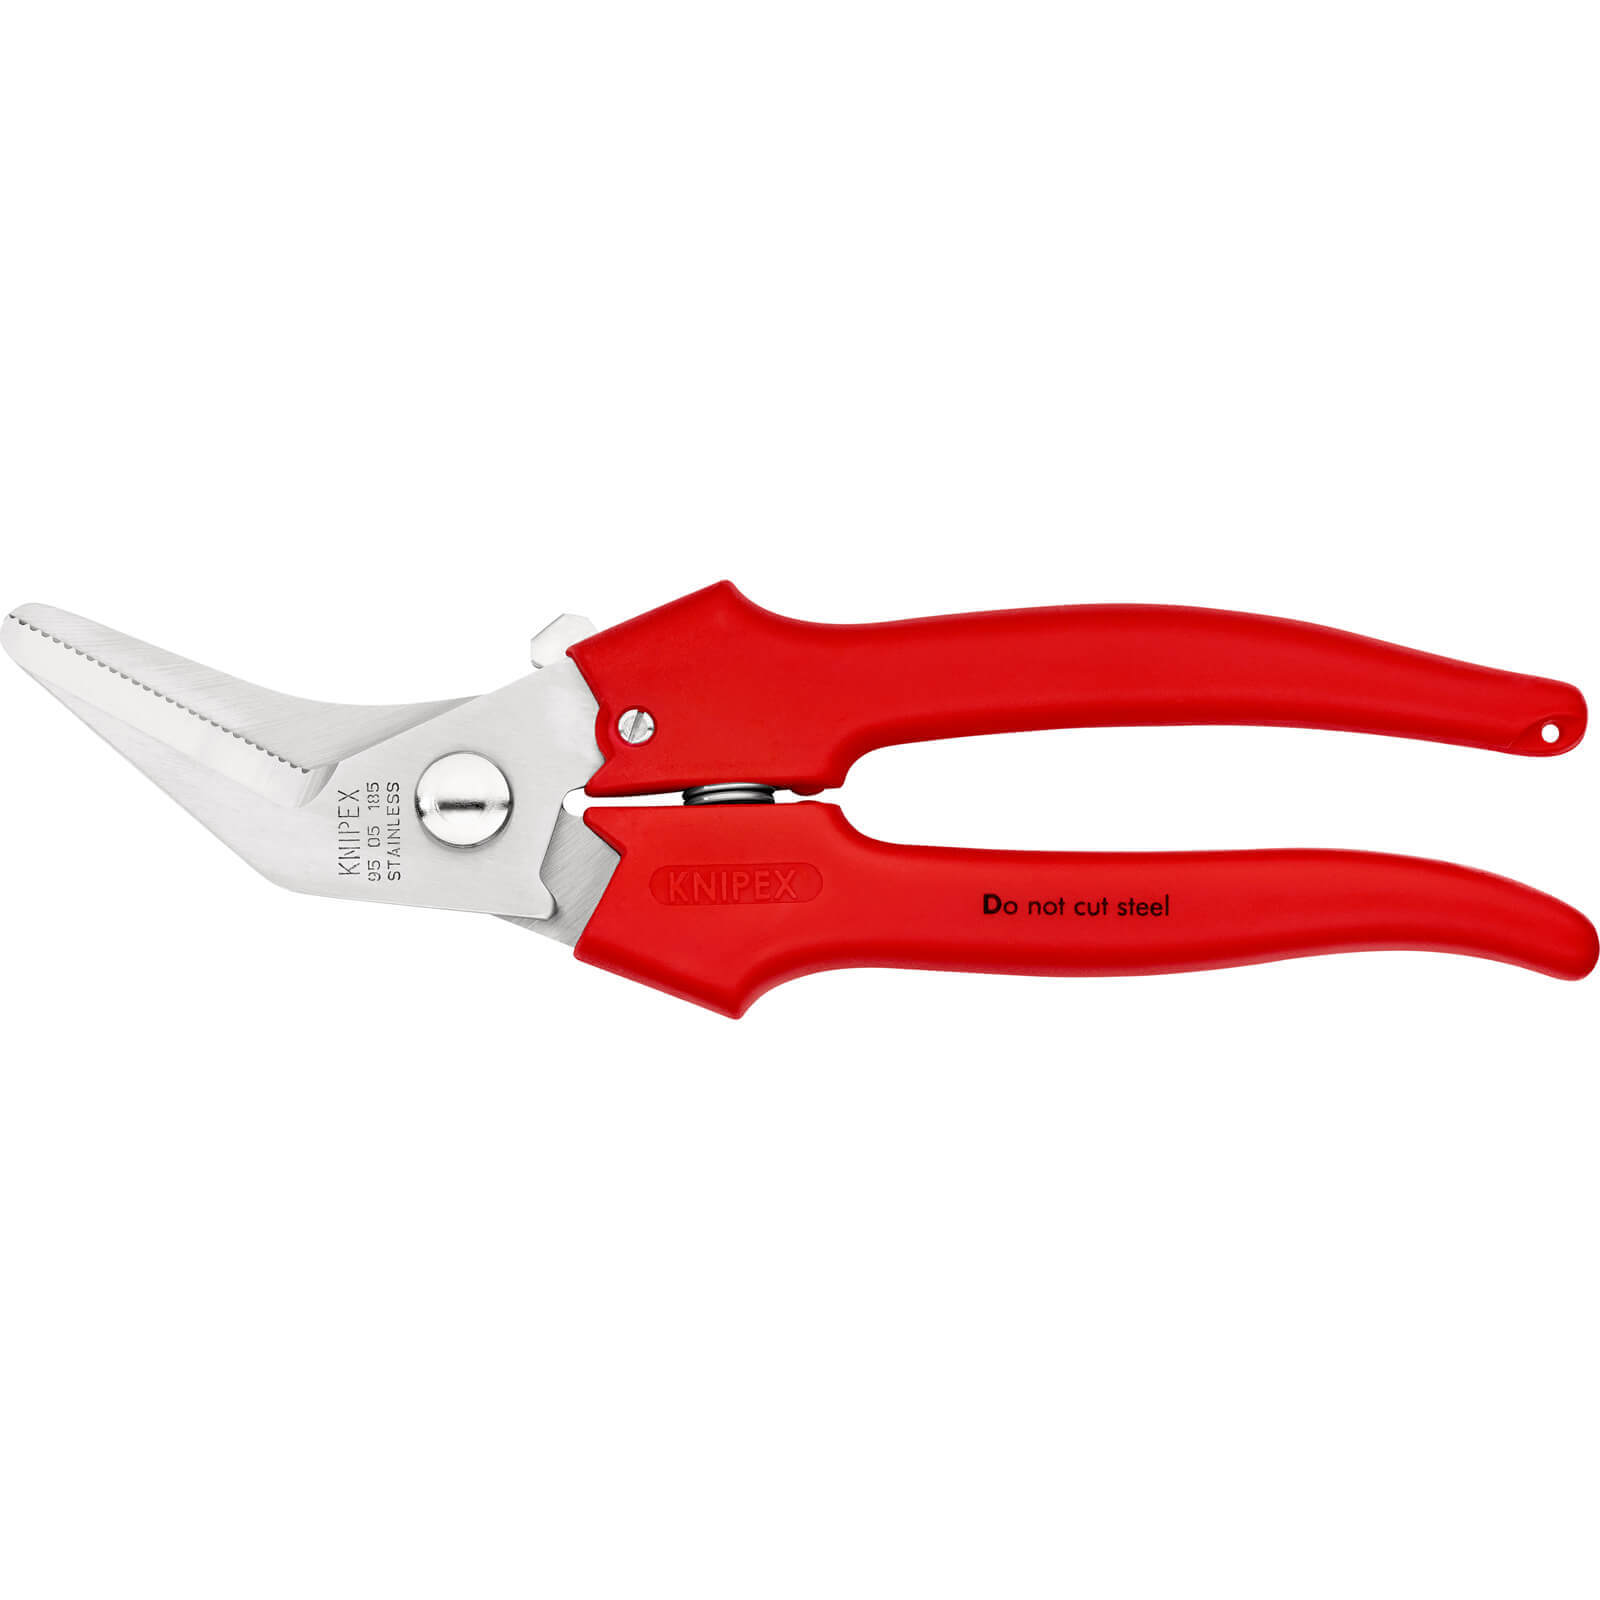 Image of Knipex 95 05 Offset Combination Shears 185mm